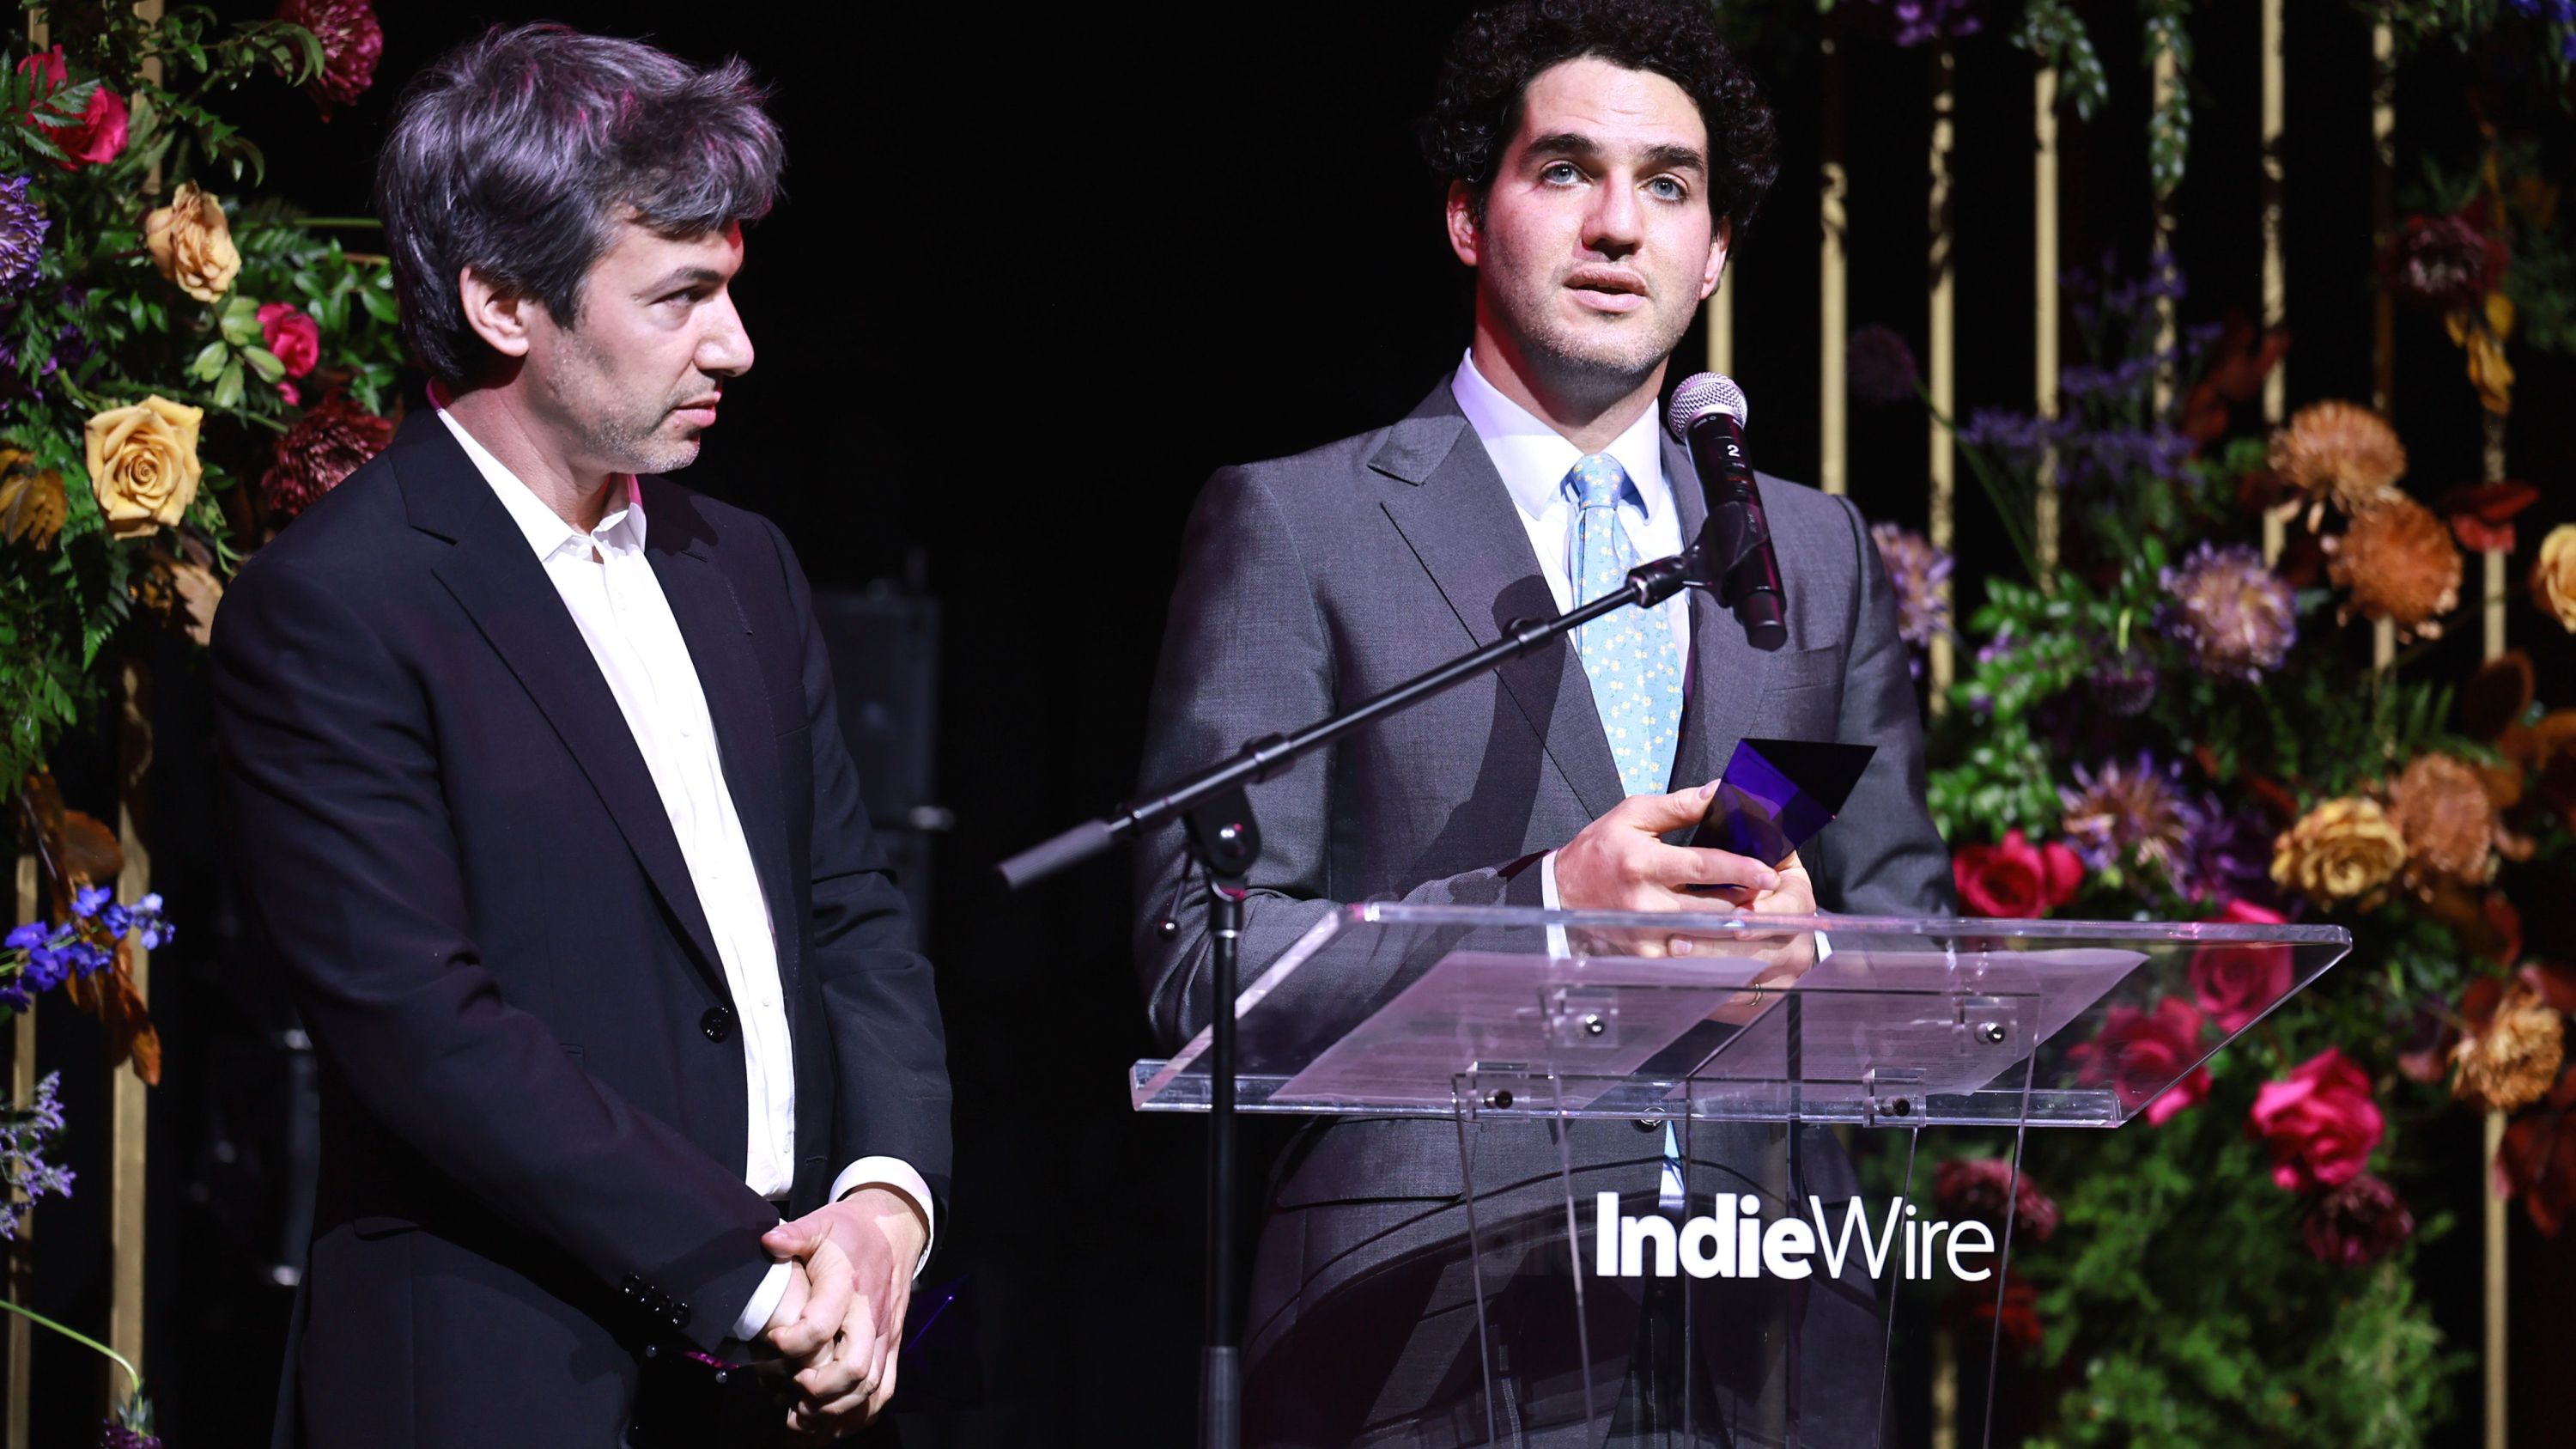 HOLLYWOOD, CALIFORNIA - DECEMBER 06: (L-R) Nathan Fielder and Benny Safdie accept the Wavelength Award onstage during IndieWire Honors 2023 at NeueHouse Hollywood on December 06, 2023 in Hollywood, California. (Photo by Matt Winkelmeyer/IndieWire via Getty Images)